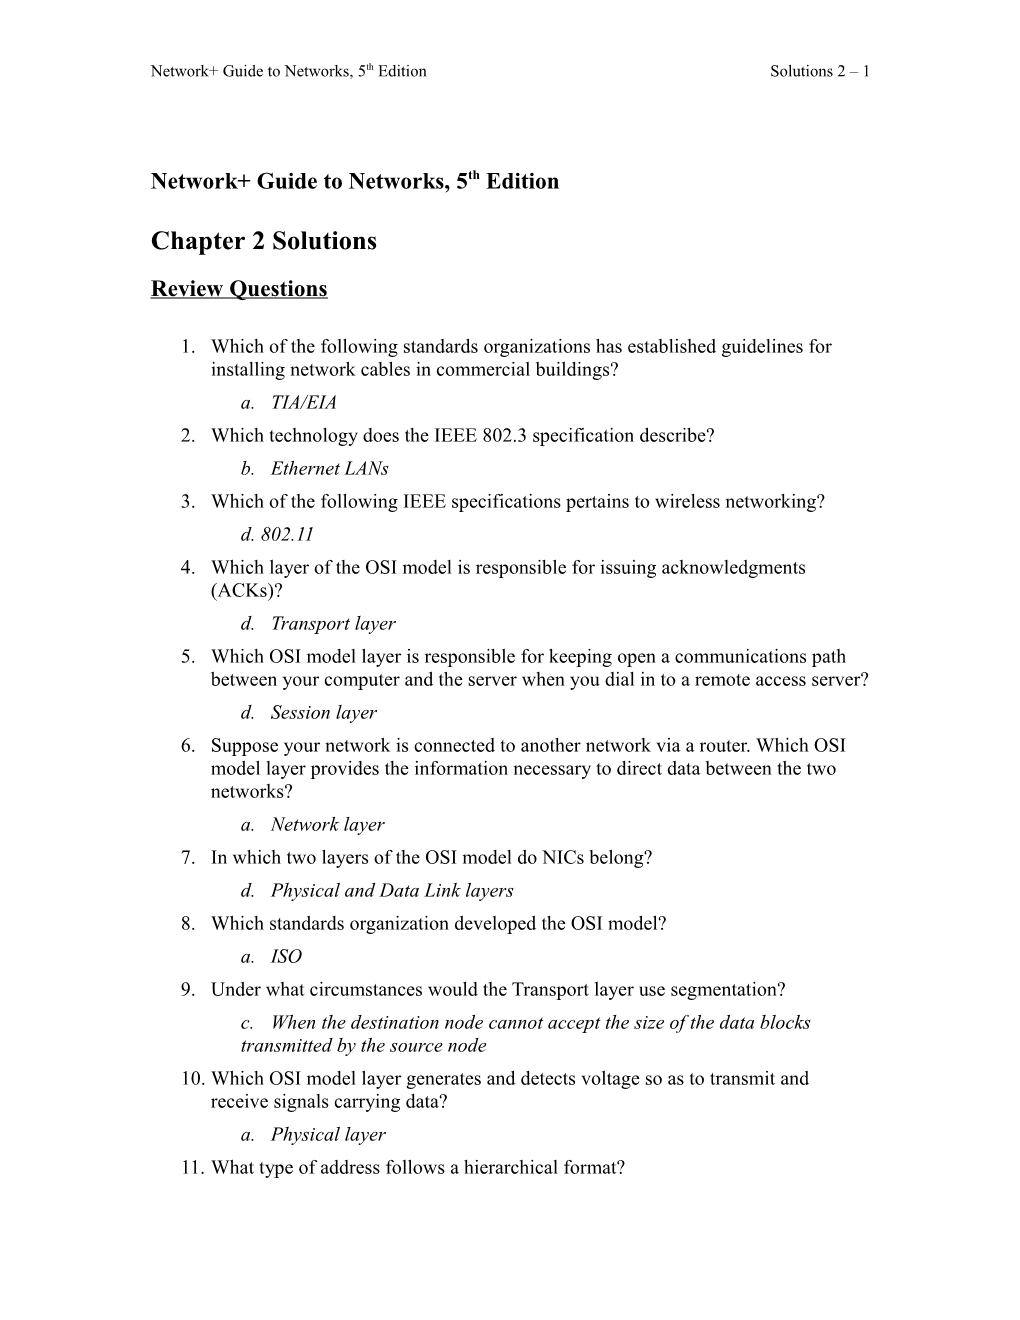 Network+ 5E., Chapter 2 Solutions